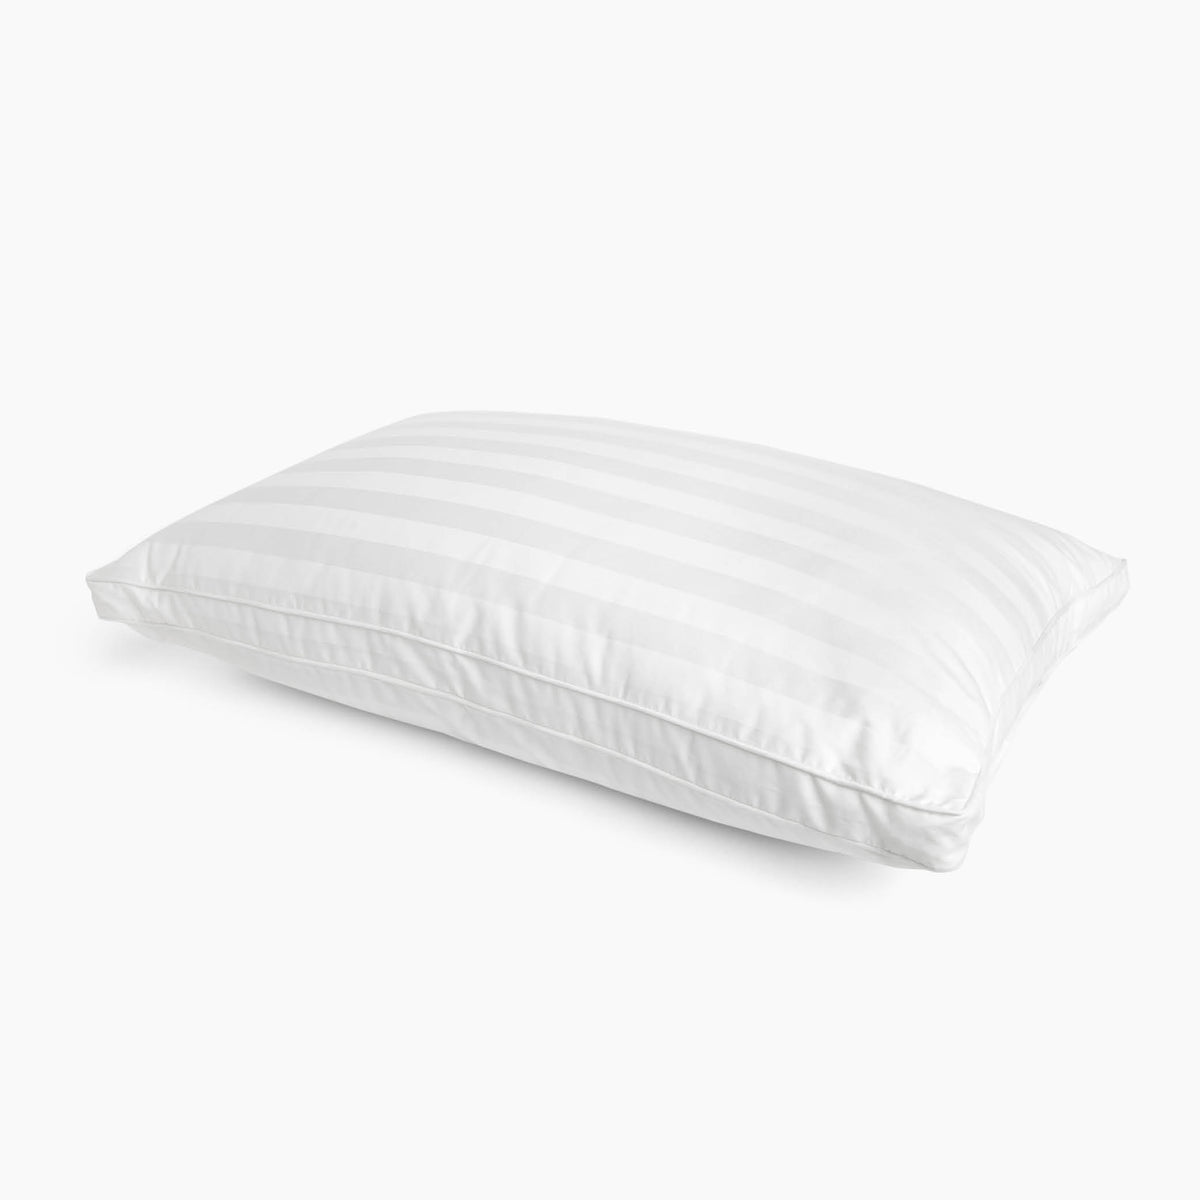 Image of Luxury Resort Hotel Collection Breathable Memory Fiber Pillow (medium/high loft) on a white background